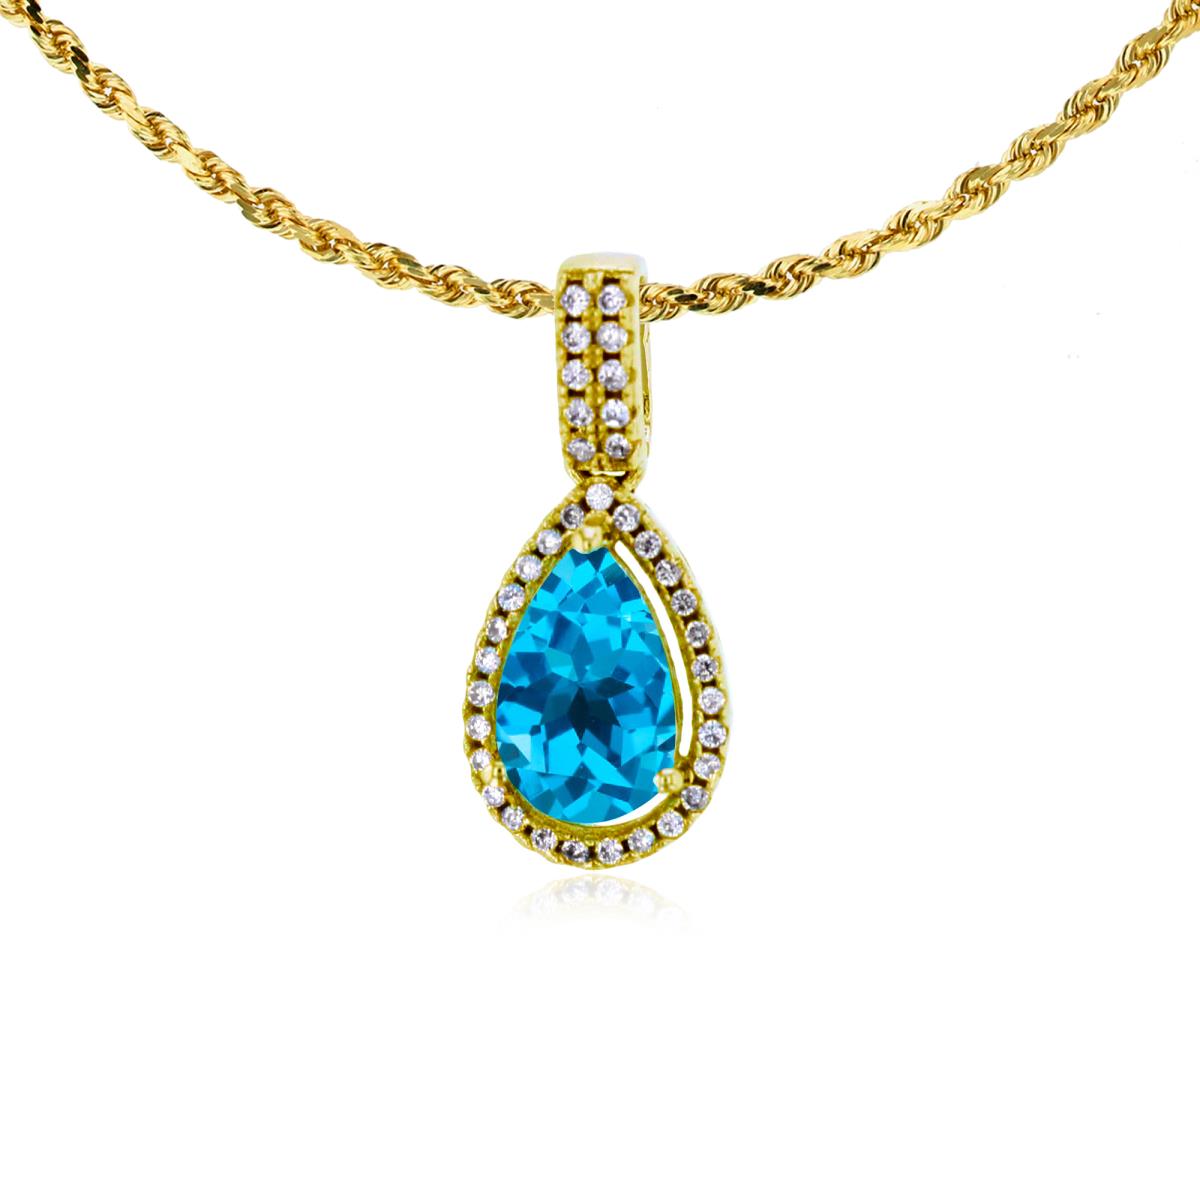 10K Yellow Gold 8x5mm Pear Cut Swiss Blue Topaz & 0.11 CTTW Diamond Halo 18" Rope Chain Necklace